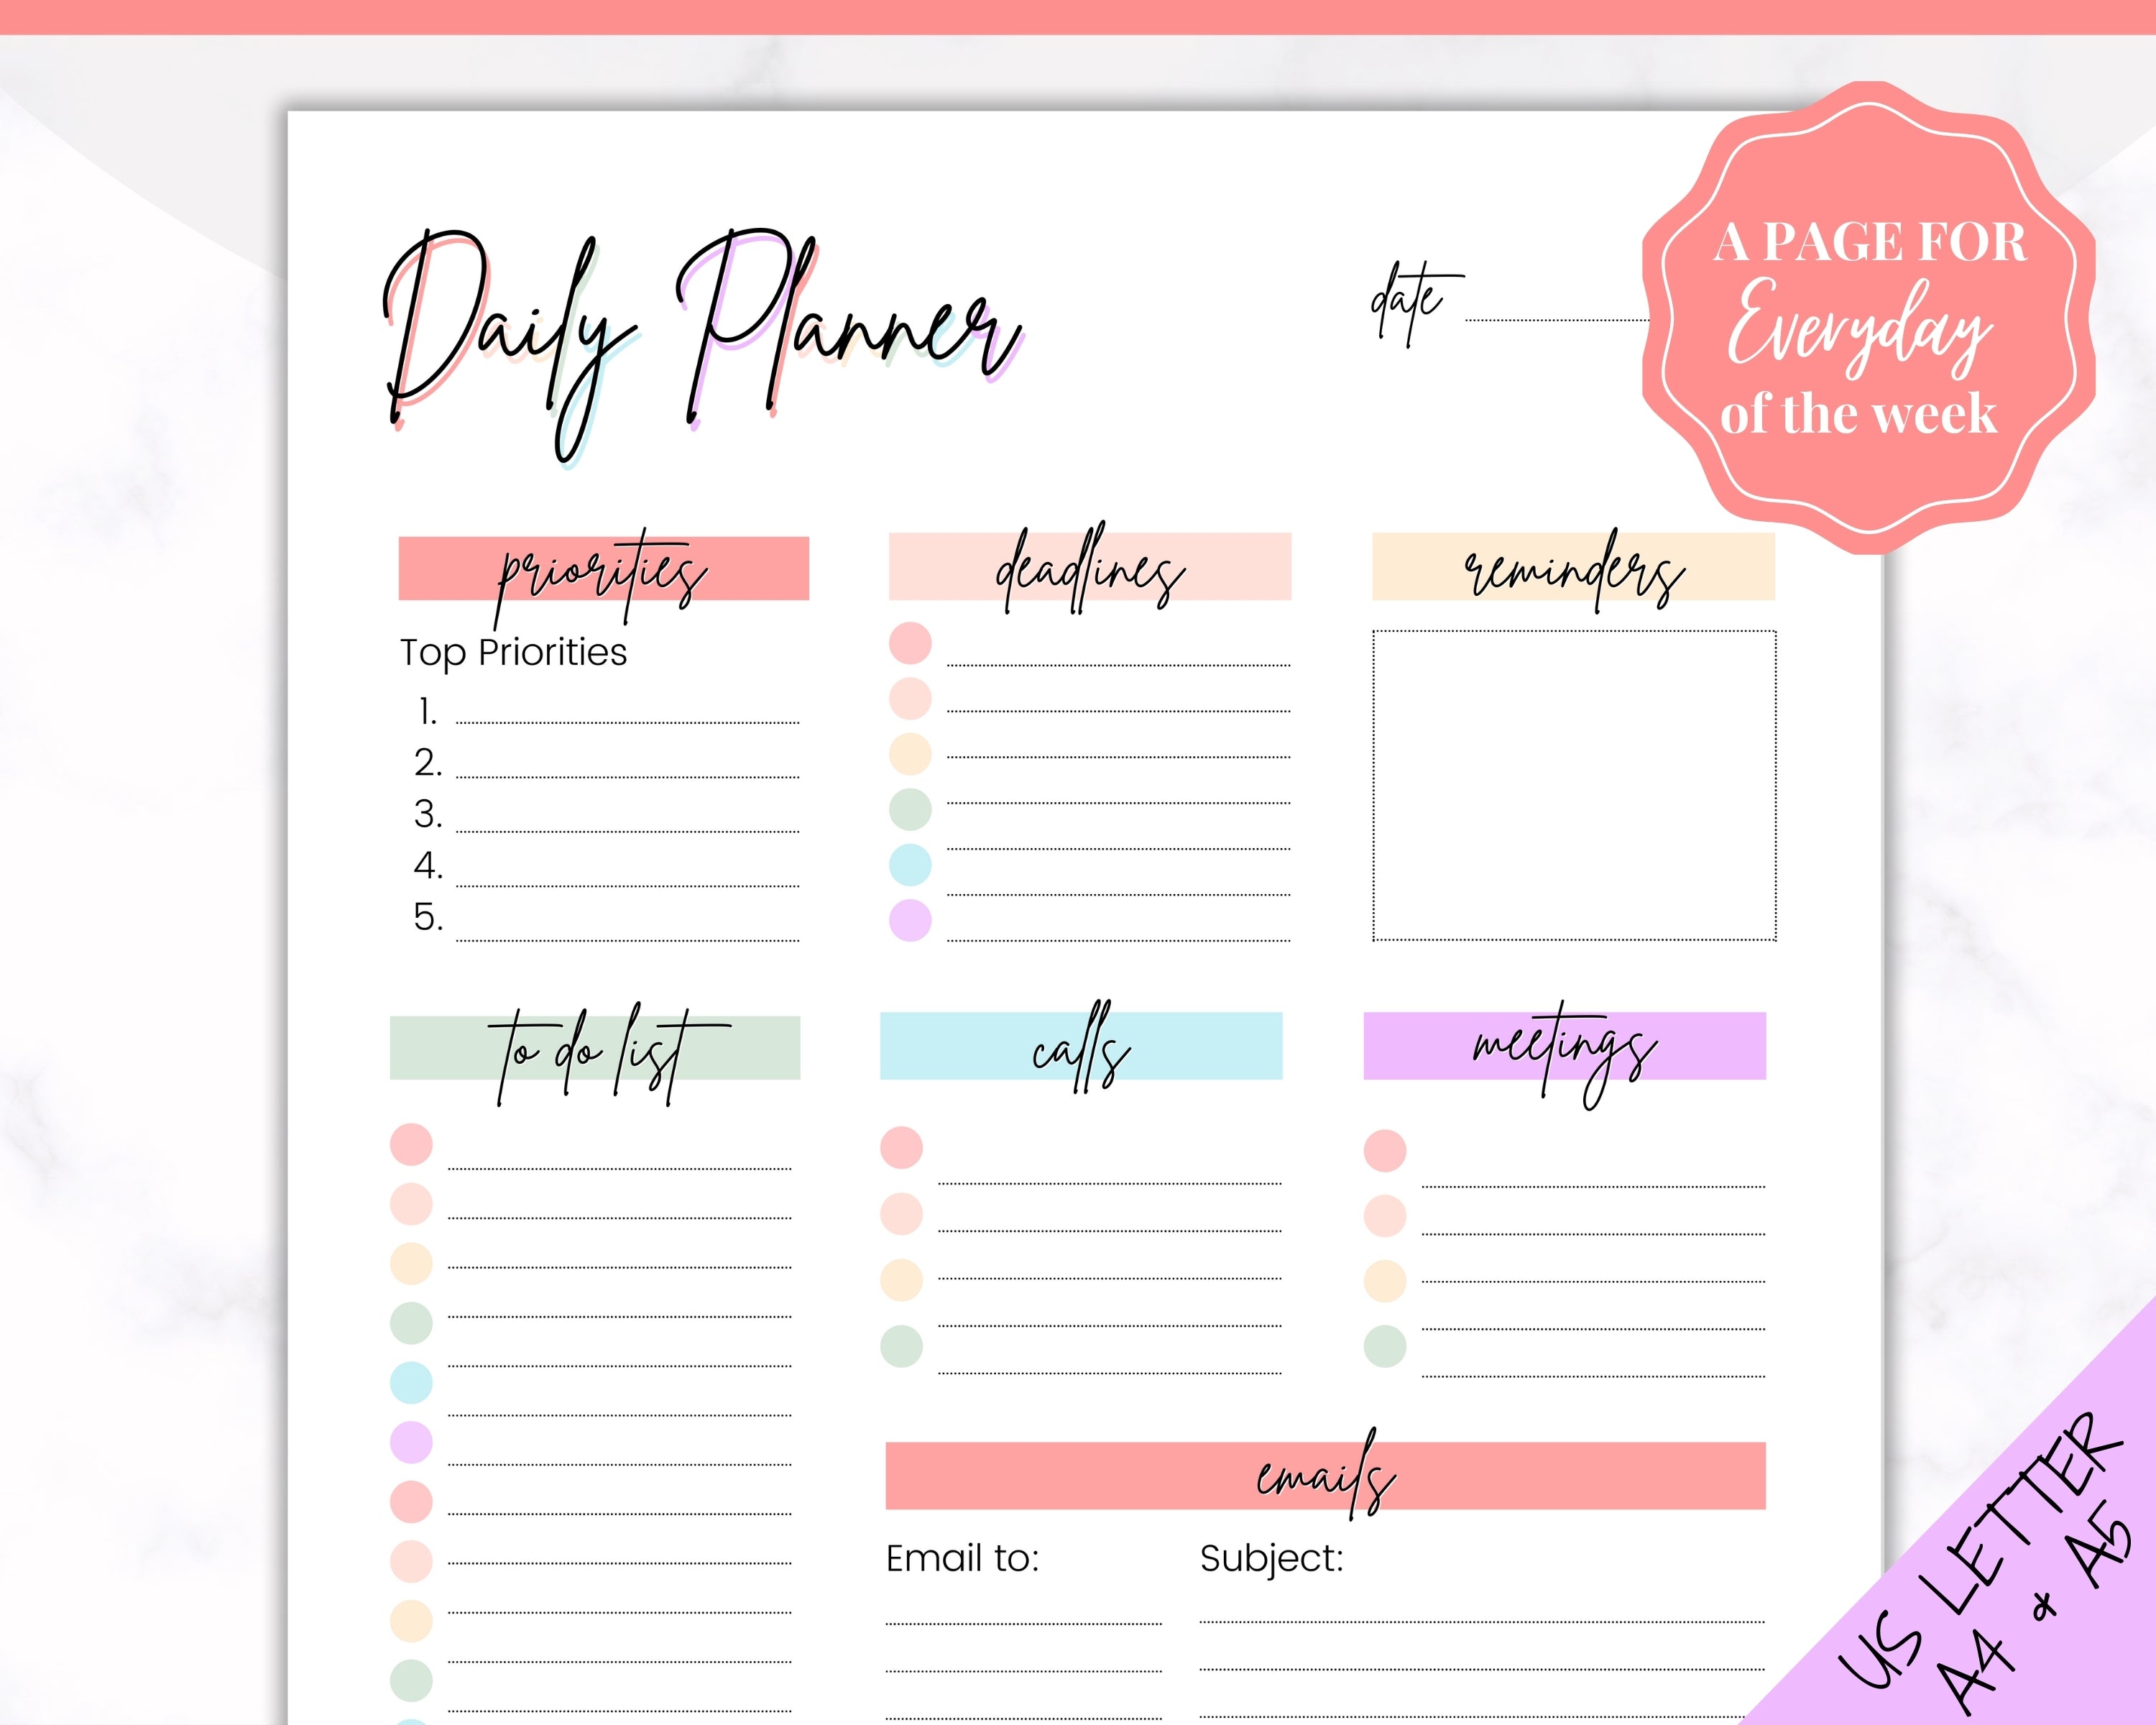 Download free Colorful Daily Planner template to design